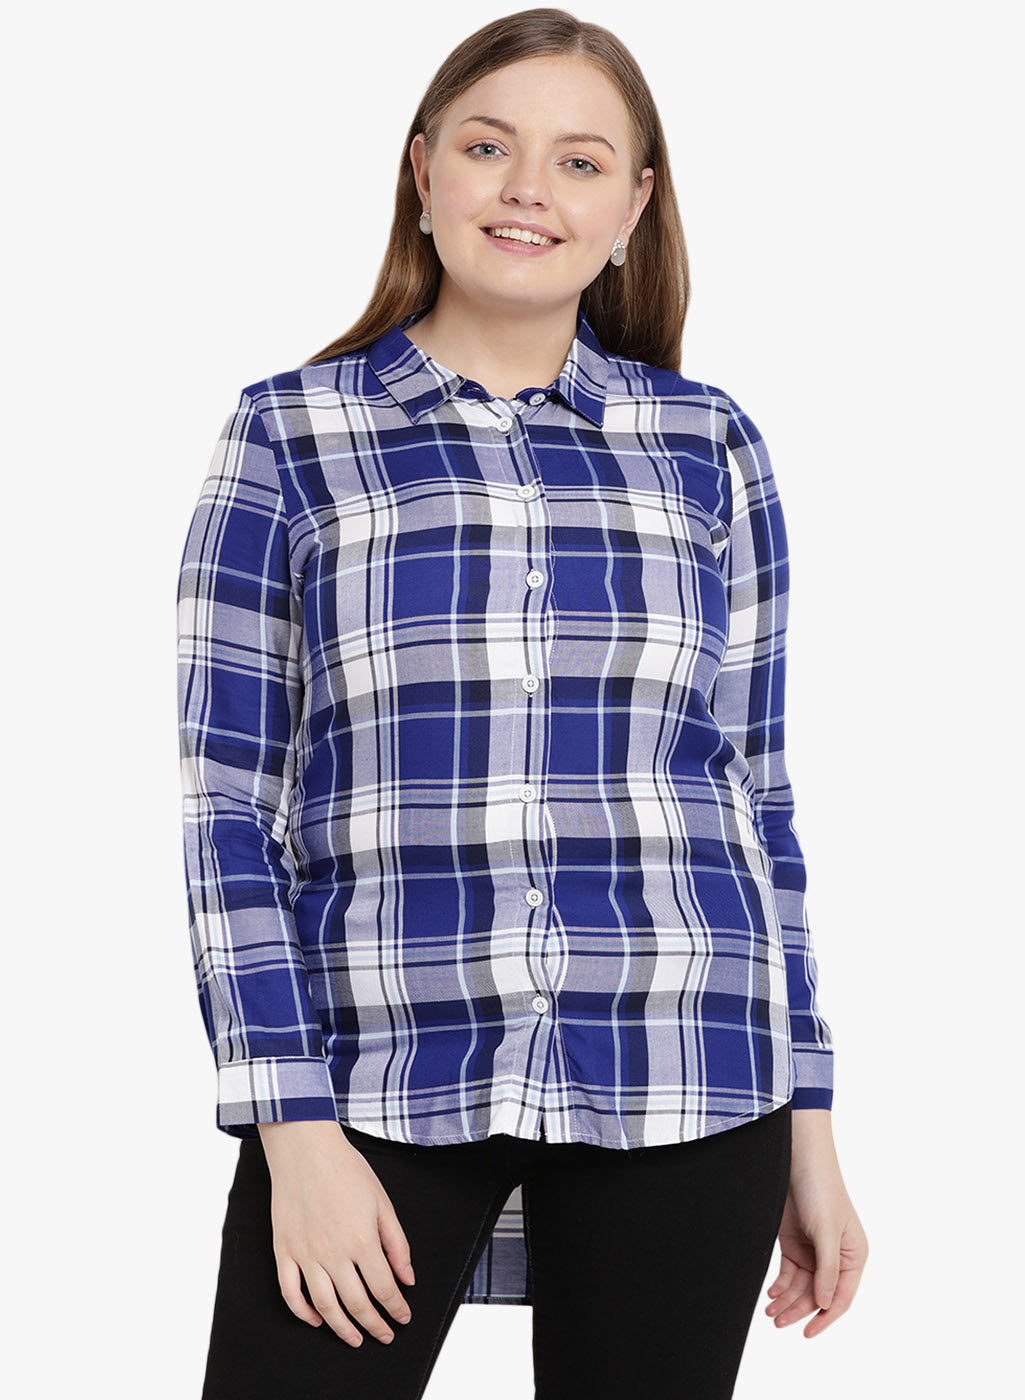 WHITE AND BLUE CHECKED SHIRT